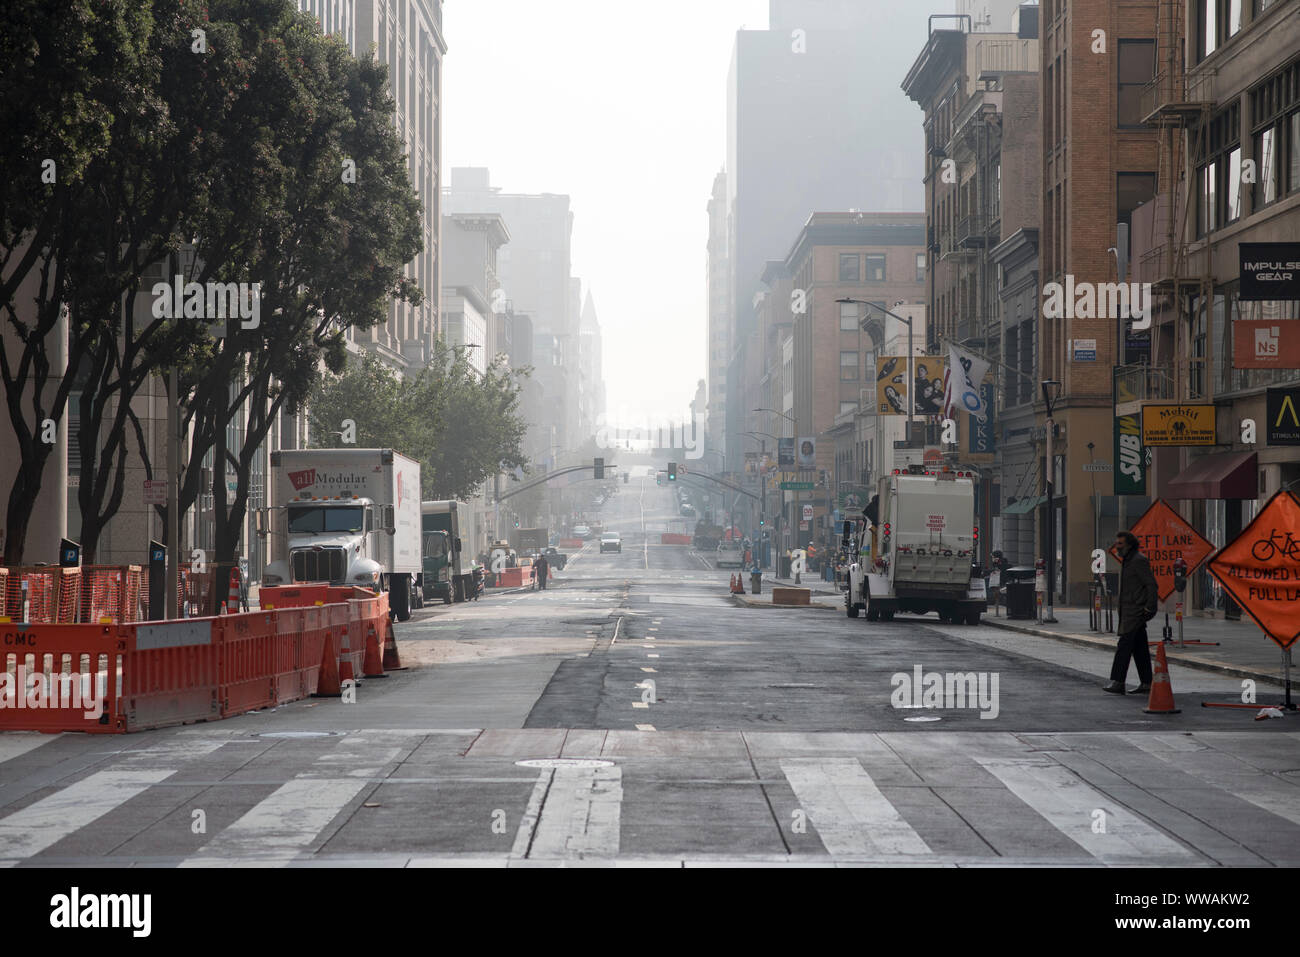 San Francisco, California - November 17, 2018: Roadwork signs and barricades sit on the corner of Market Street and 2nd Street. Stock Photo